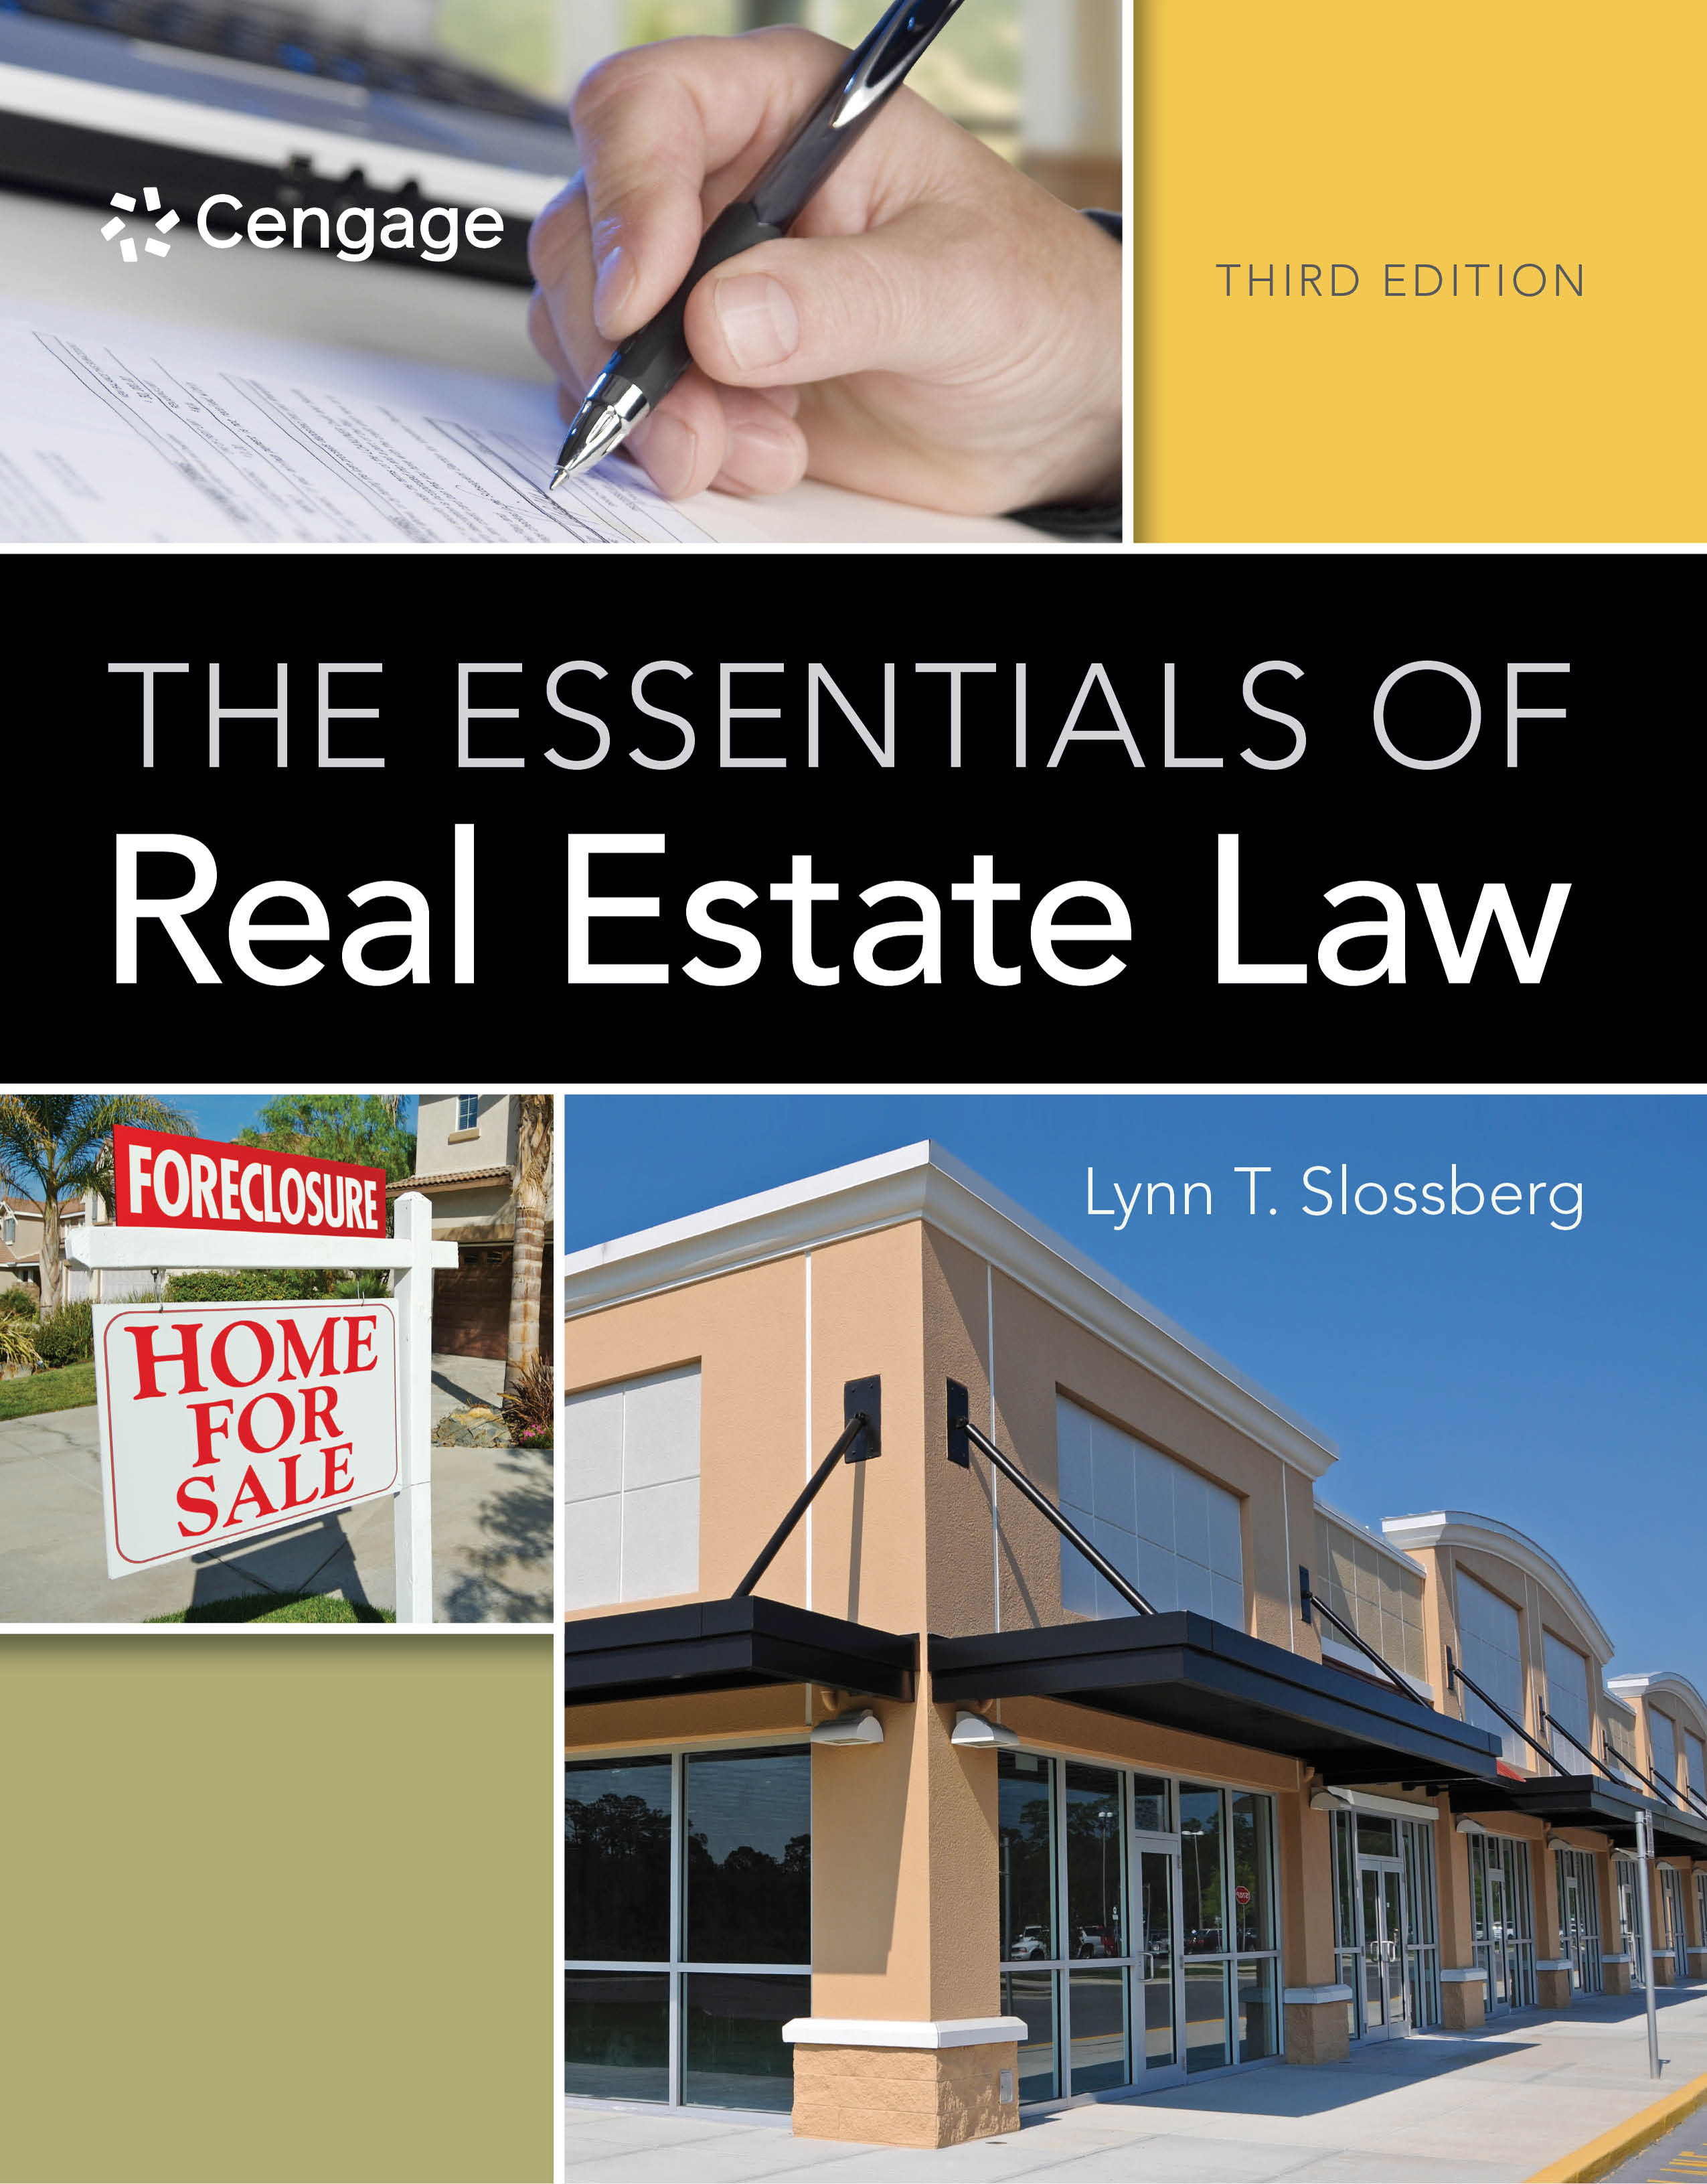 The Essentials of Real Estate Law